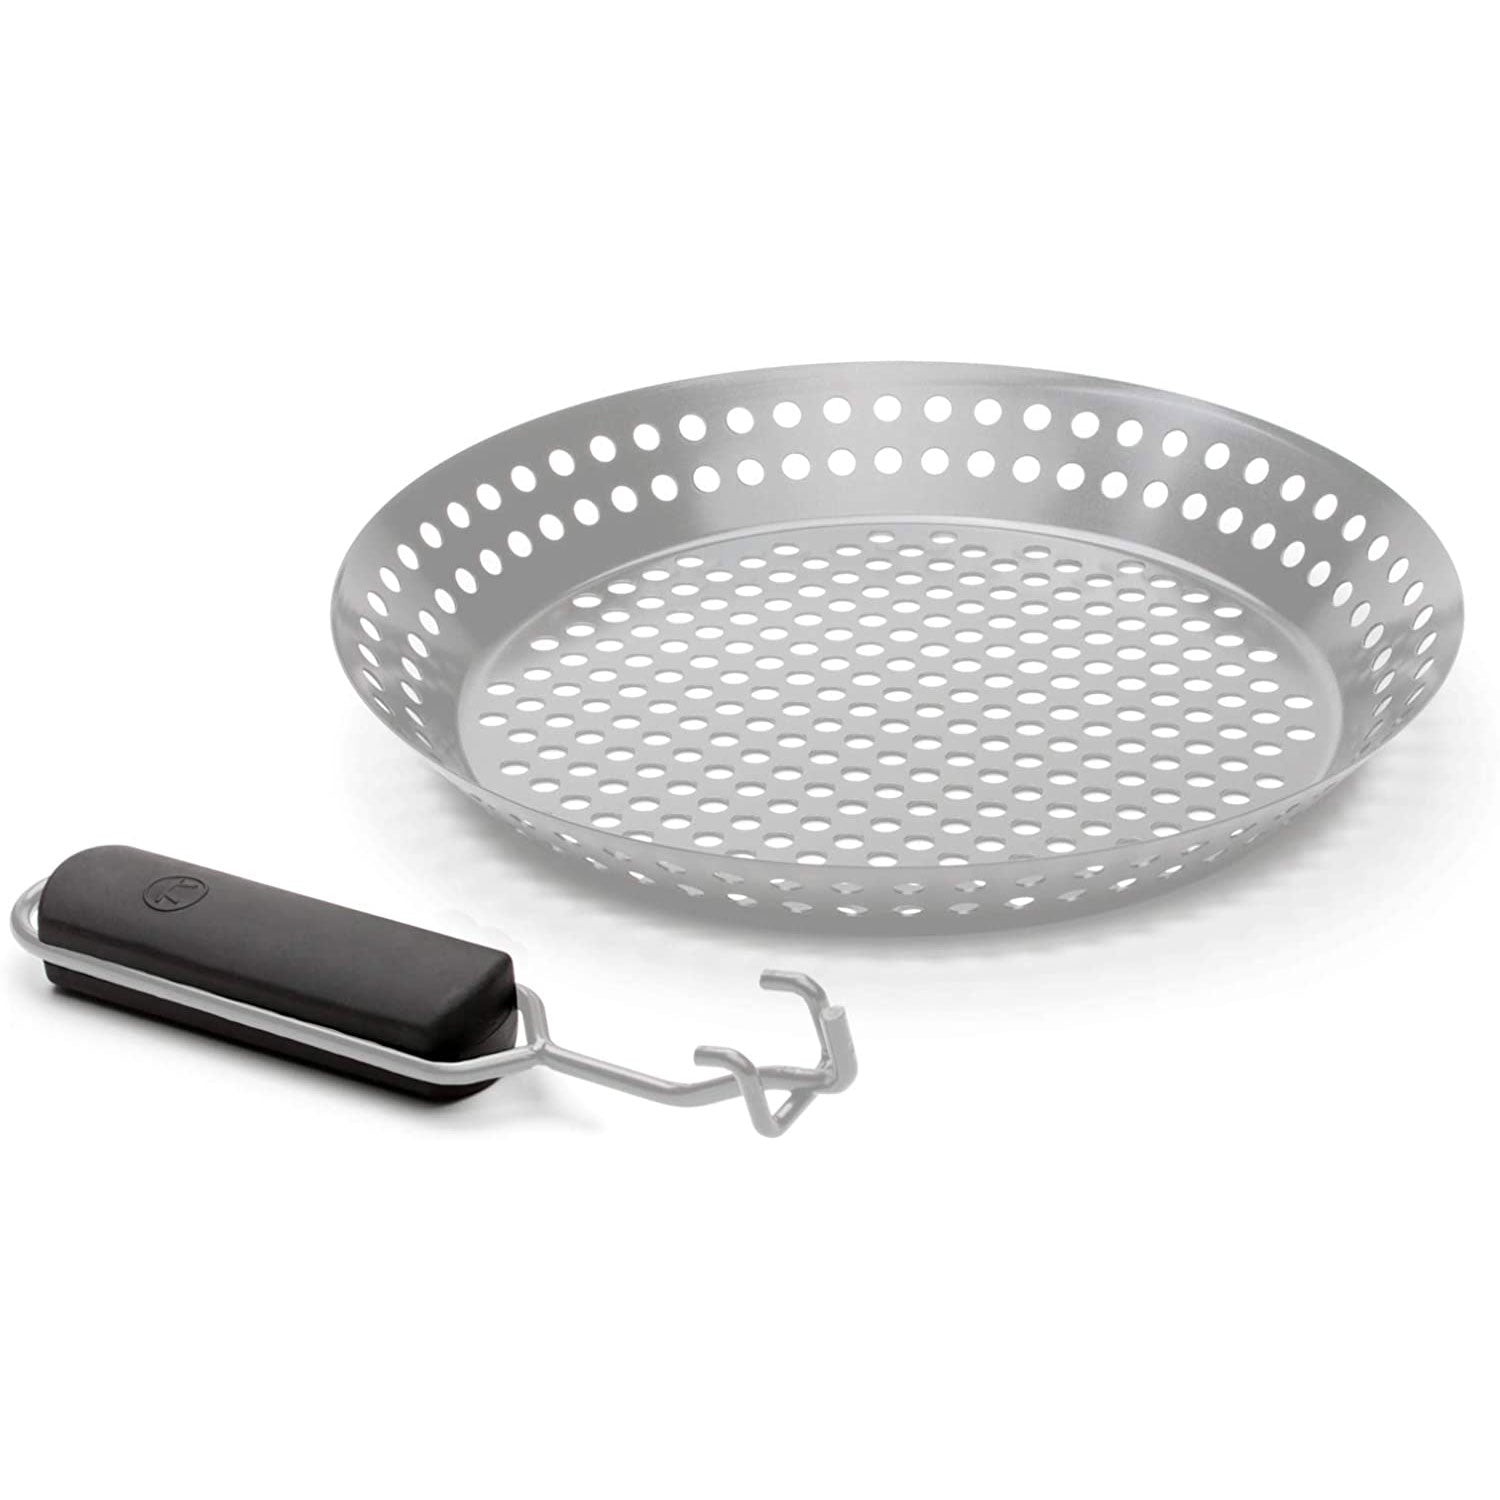 Stainless Steel Skillet with Removable Handle Outset Indigo Pool Patio BBQ